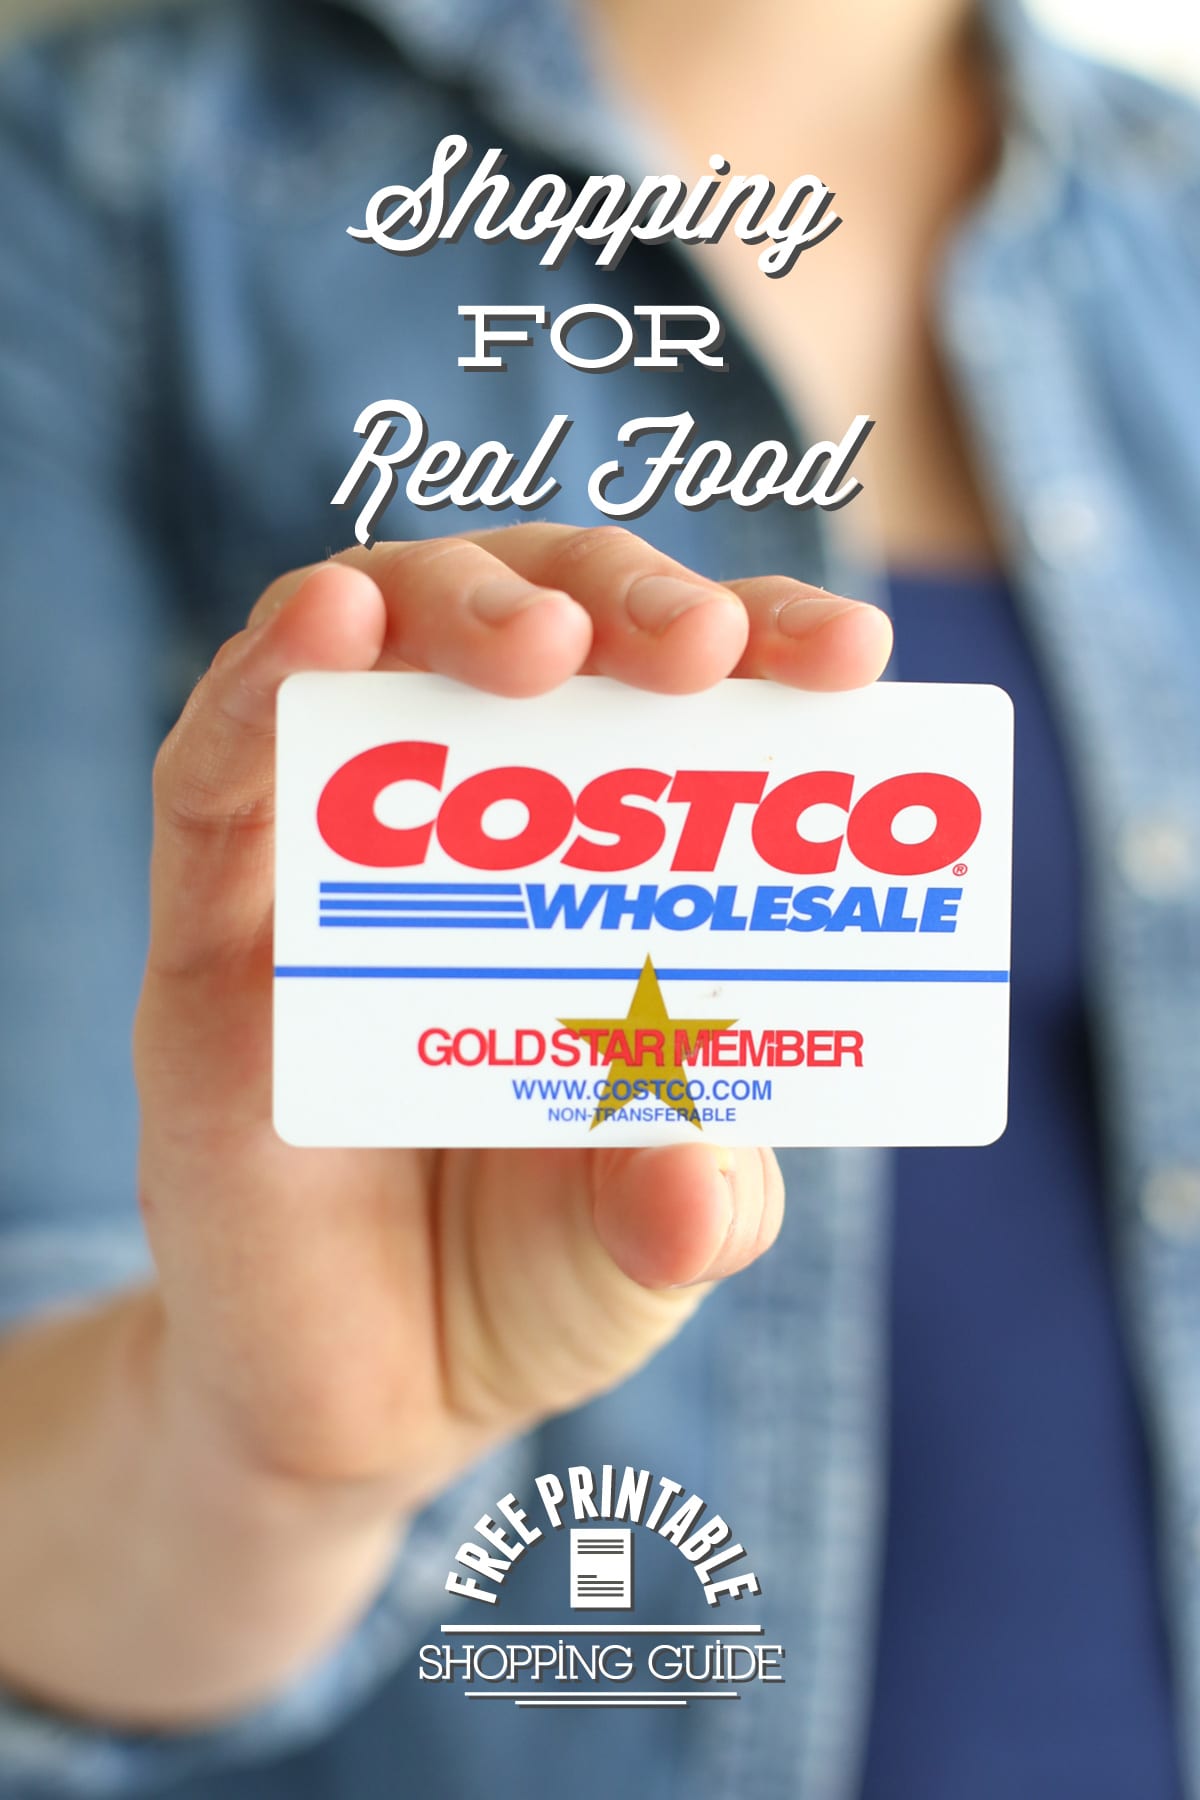 Shopping for Real Food at Costco: My Top Picks + Printable Shopping Guide